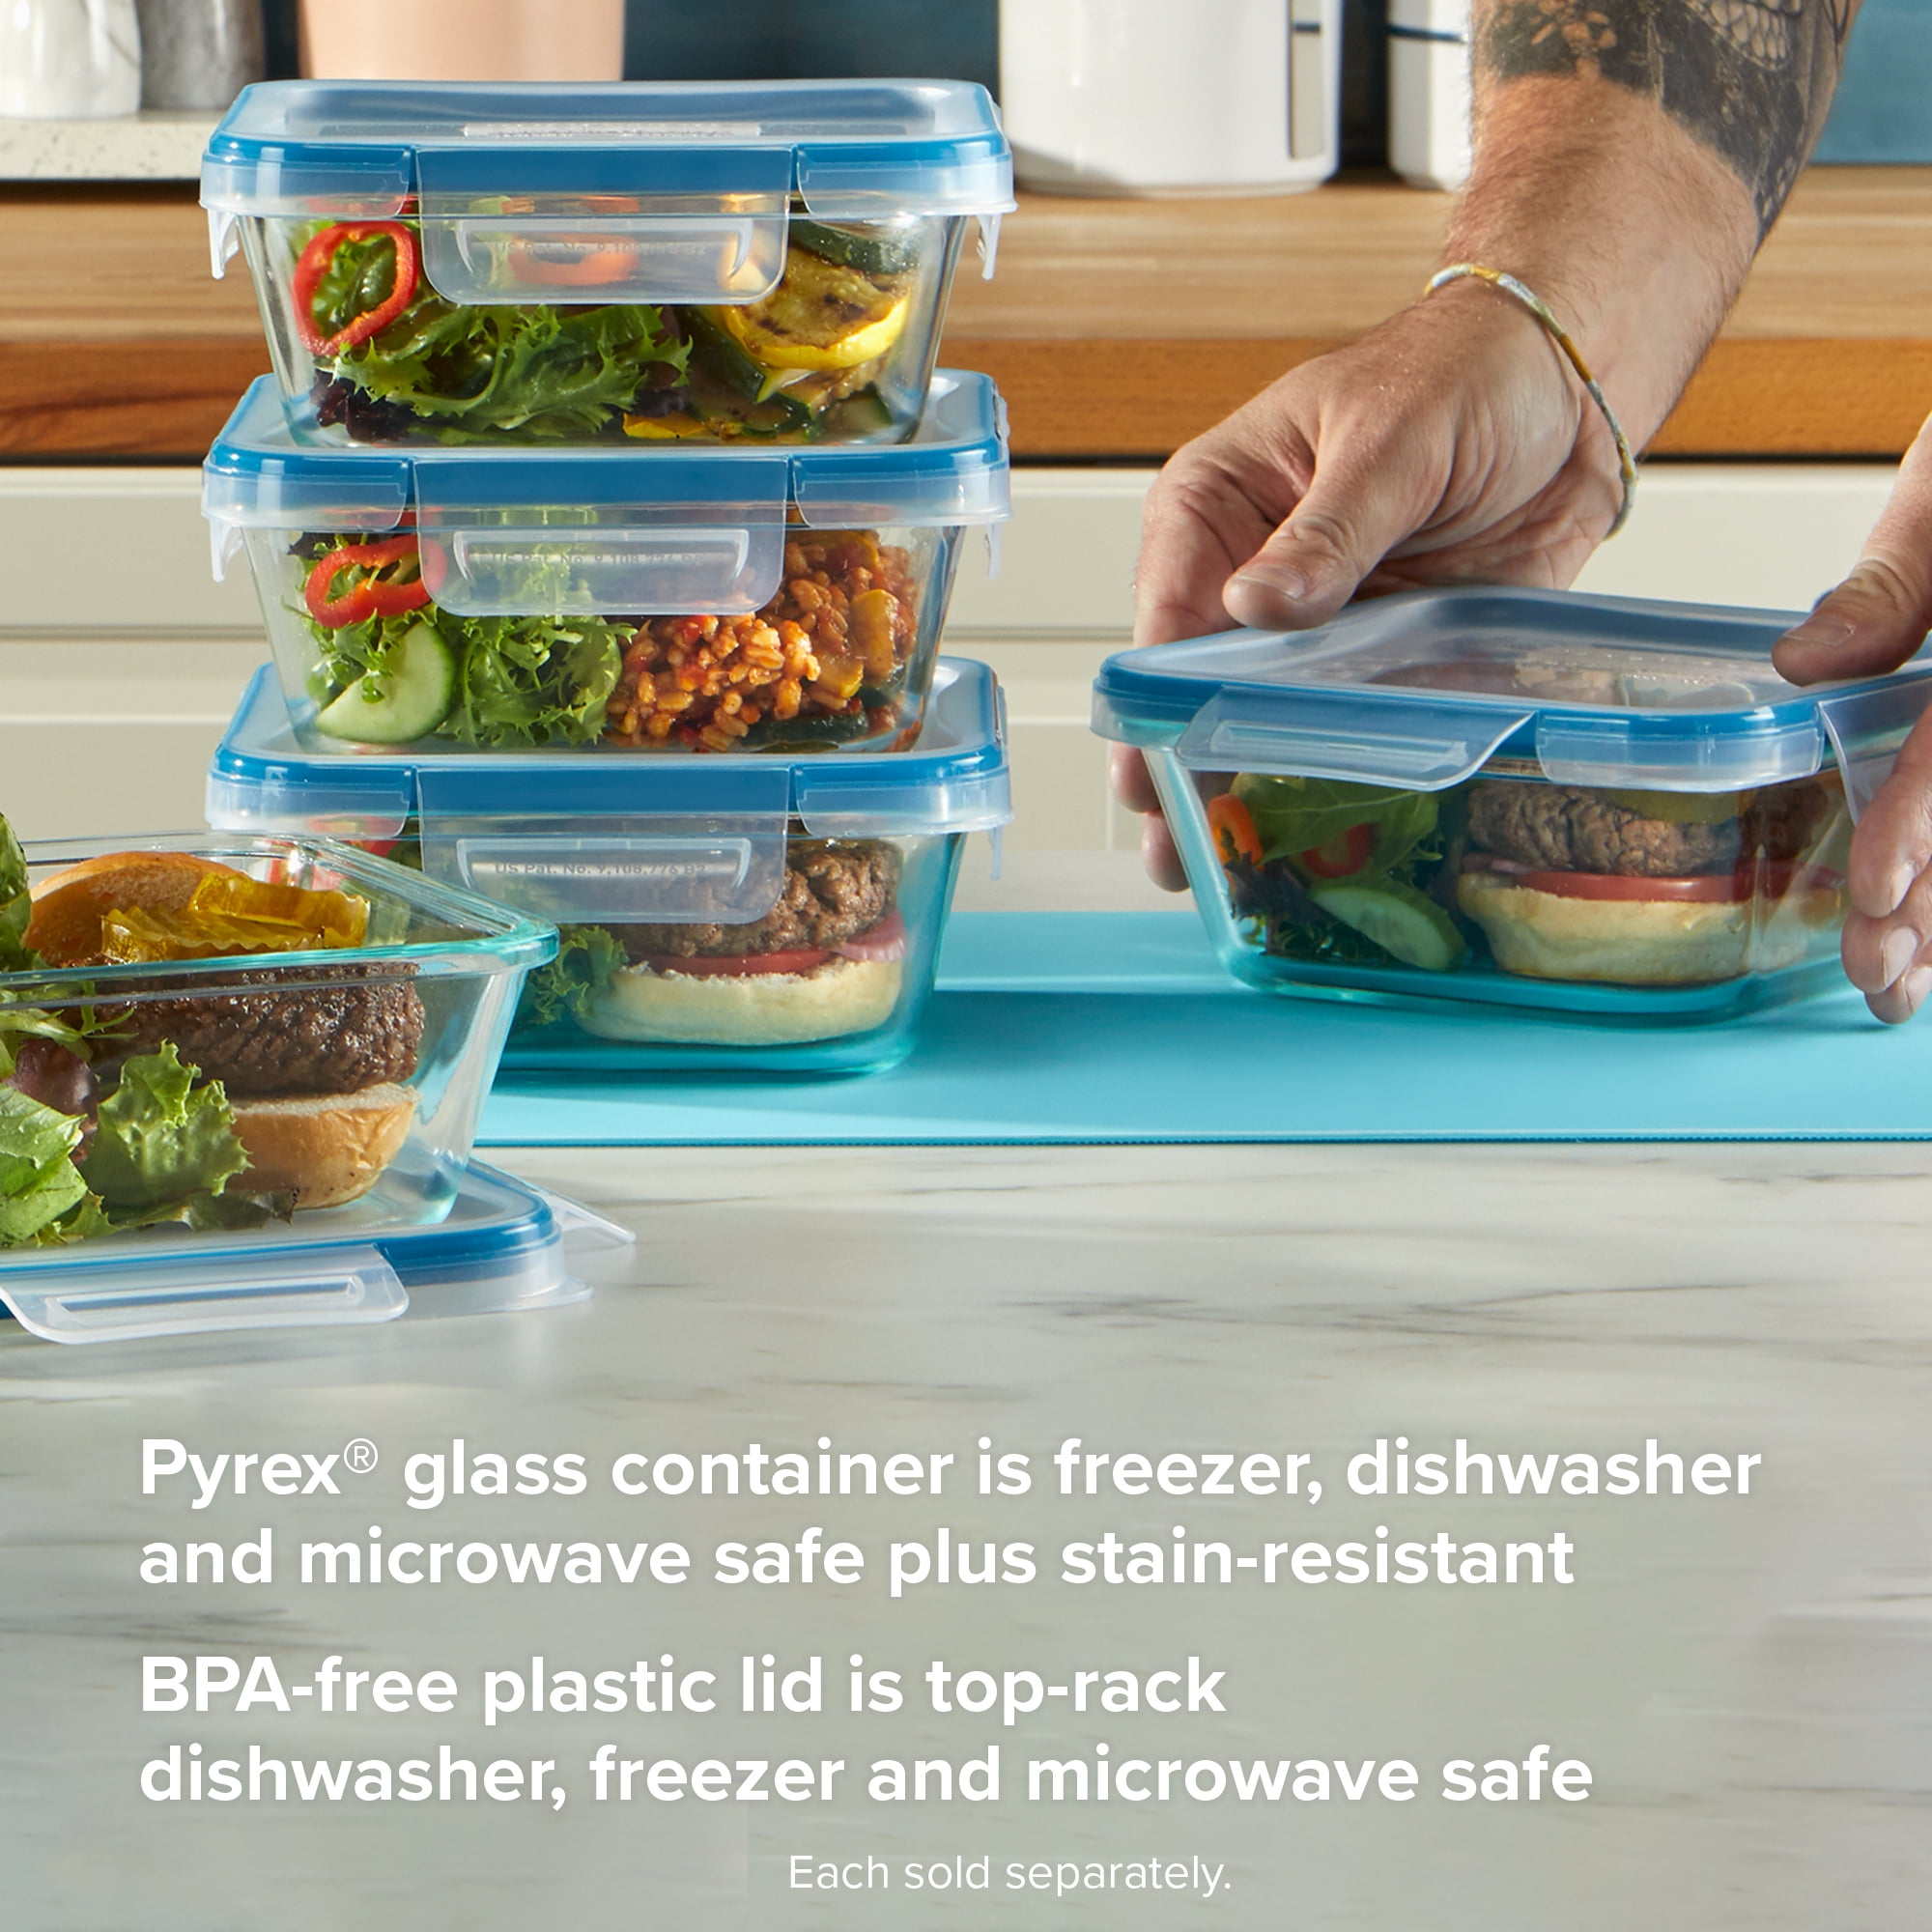  Snapware Total Solution 24-Pc Glass Food Storage Container Meal  Prep Set with Plastic Lids, 4-Cup, 2-Cup & 1-Cup, BPA-Free Lids with 4  Locking Tabs, Microwave, Dishwasher, and Freezer Safe: Home 